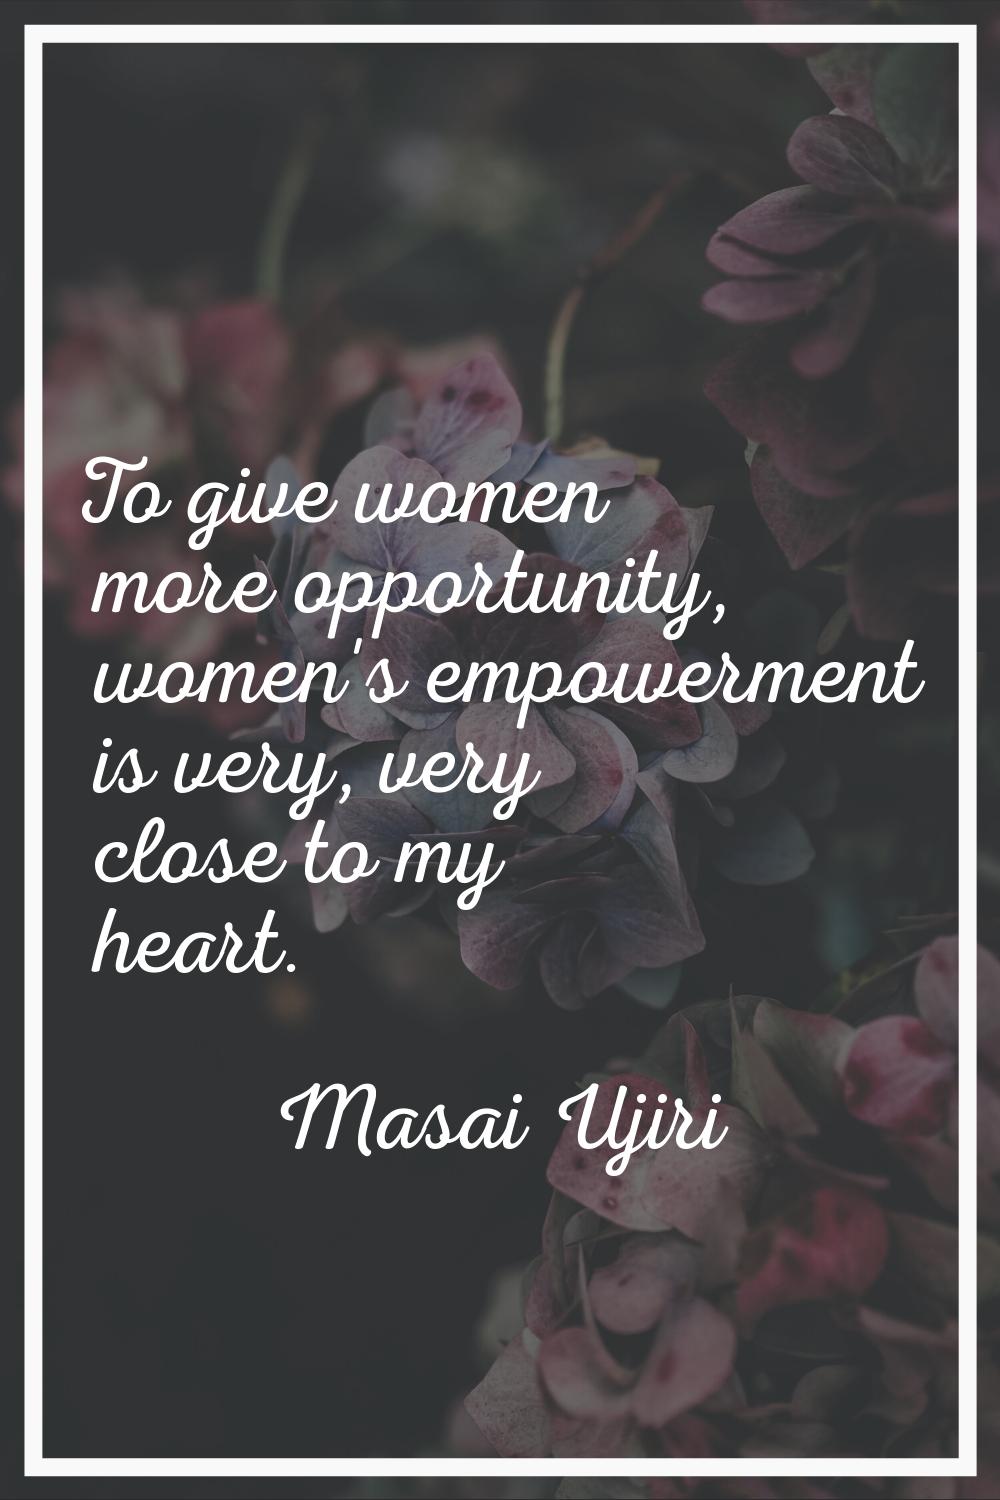 To give women more opportunity, women's empowerment is very, very close to my heart.